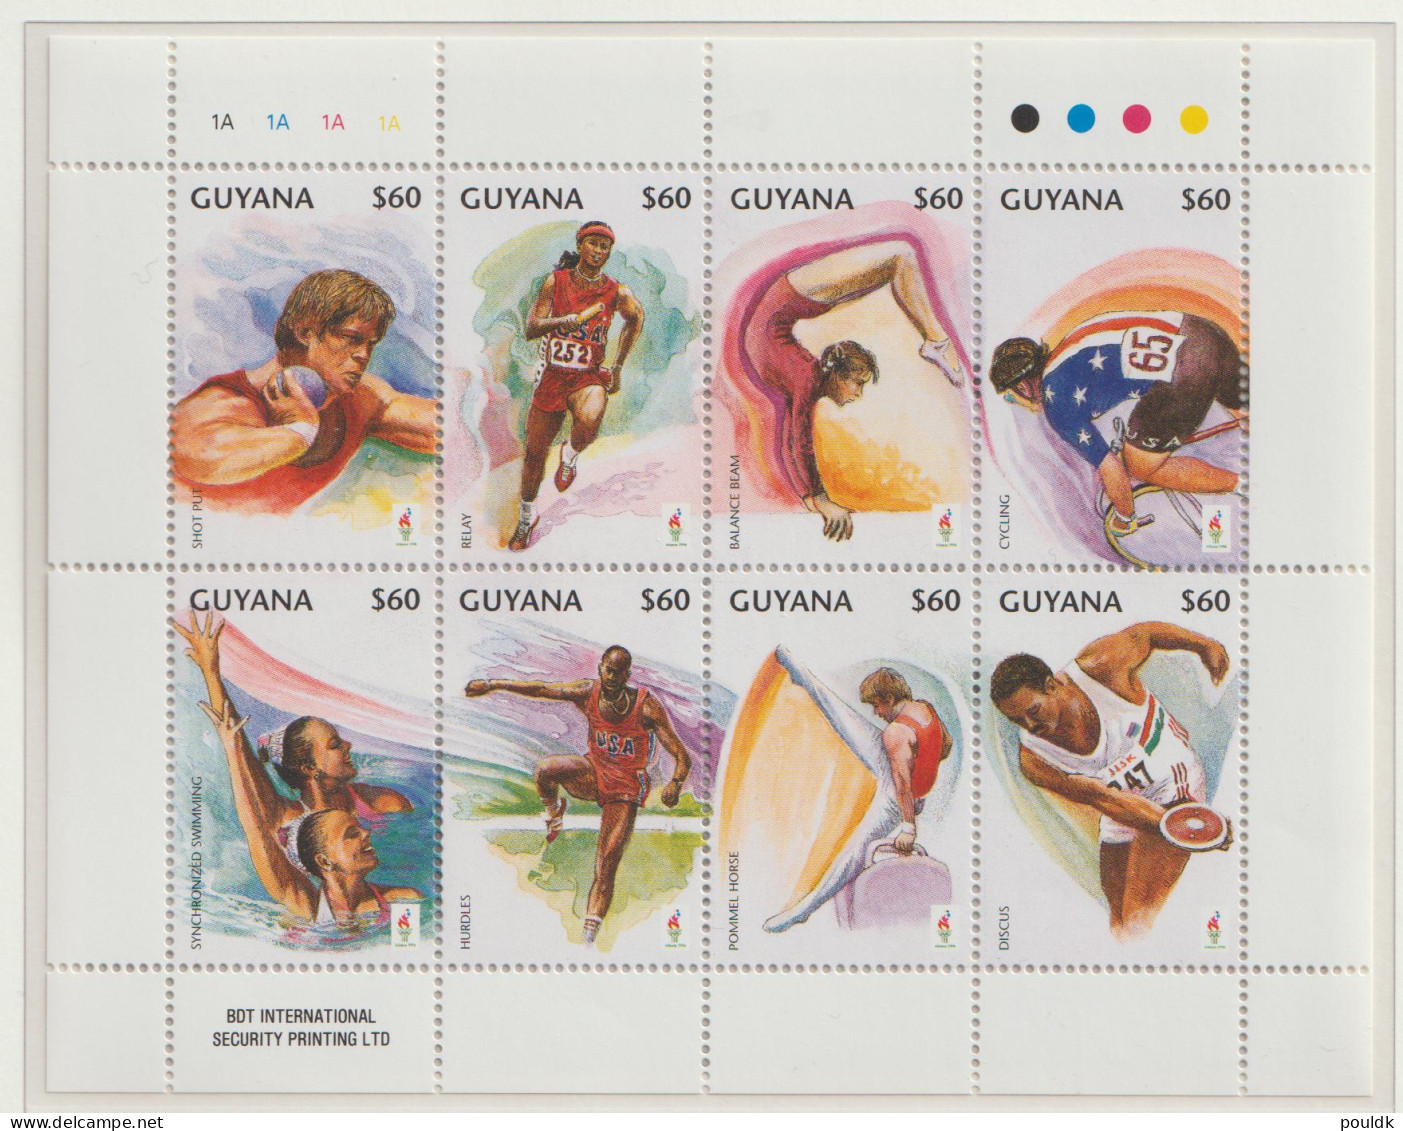 Guyana Two Souvenir Sheets From Olympic Games In Atlanta 1996 MNH/**. Postal Weight Approx. 0,04 Kg. Please Read - Estate 1996: Atlanta